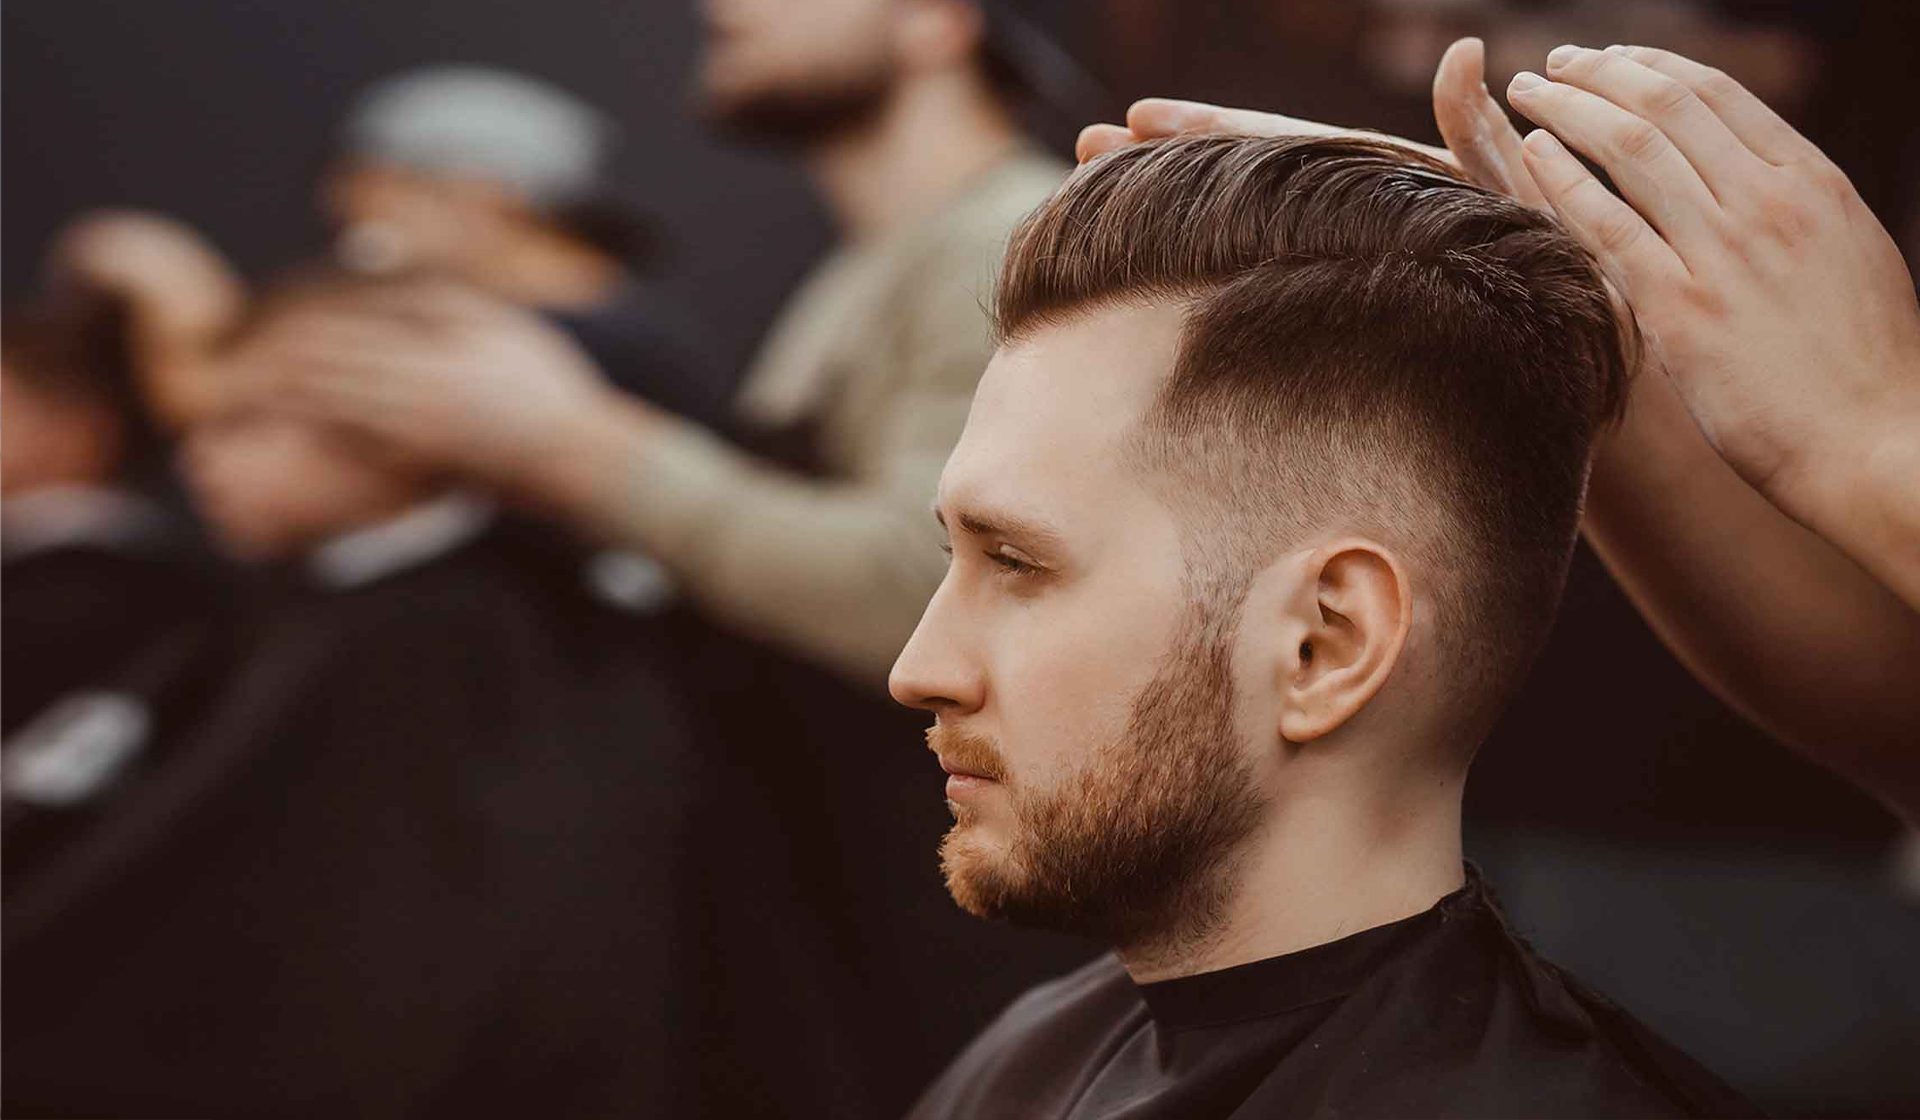 THE TEXTURED CROP HAIRSTYLE AND WHAT TO ASK YOUR BARBER